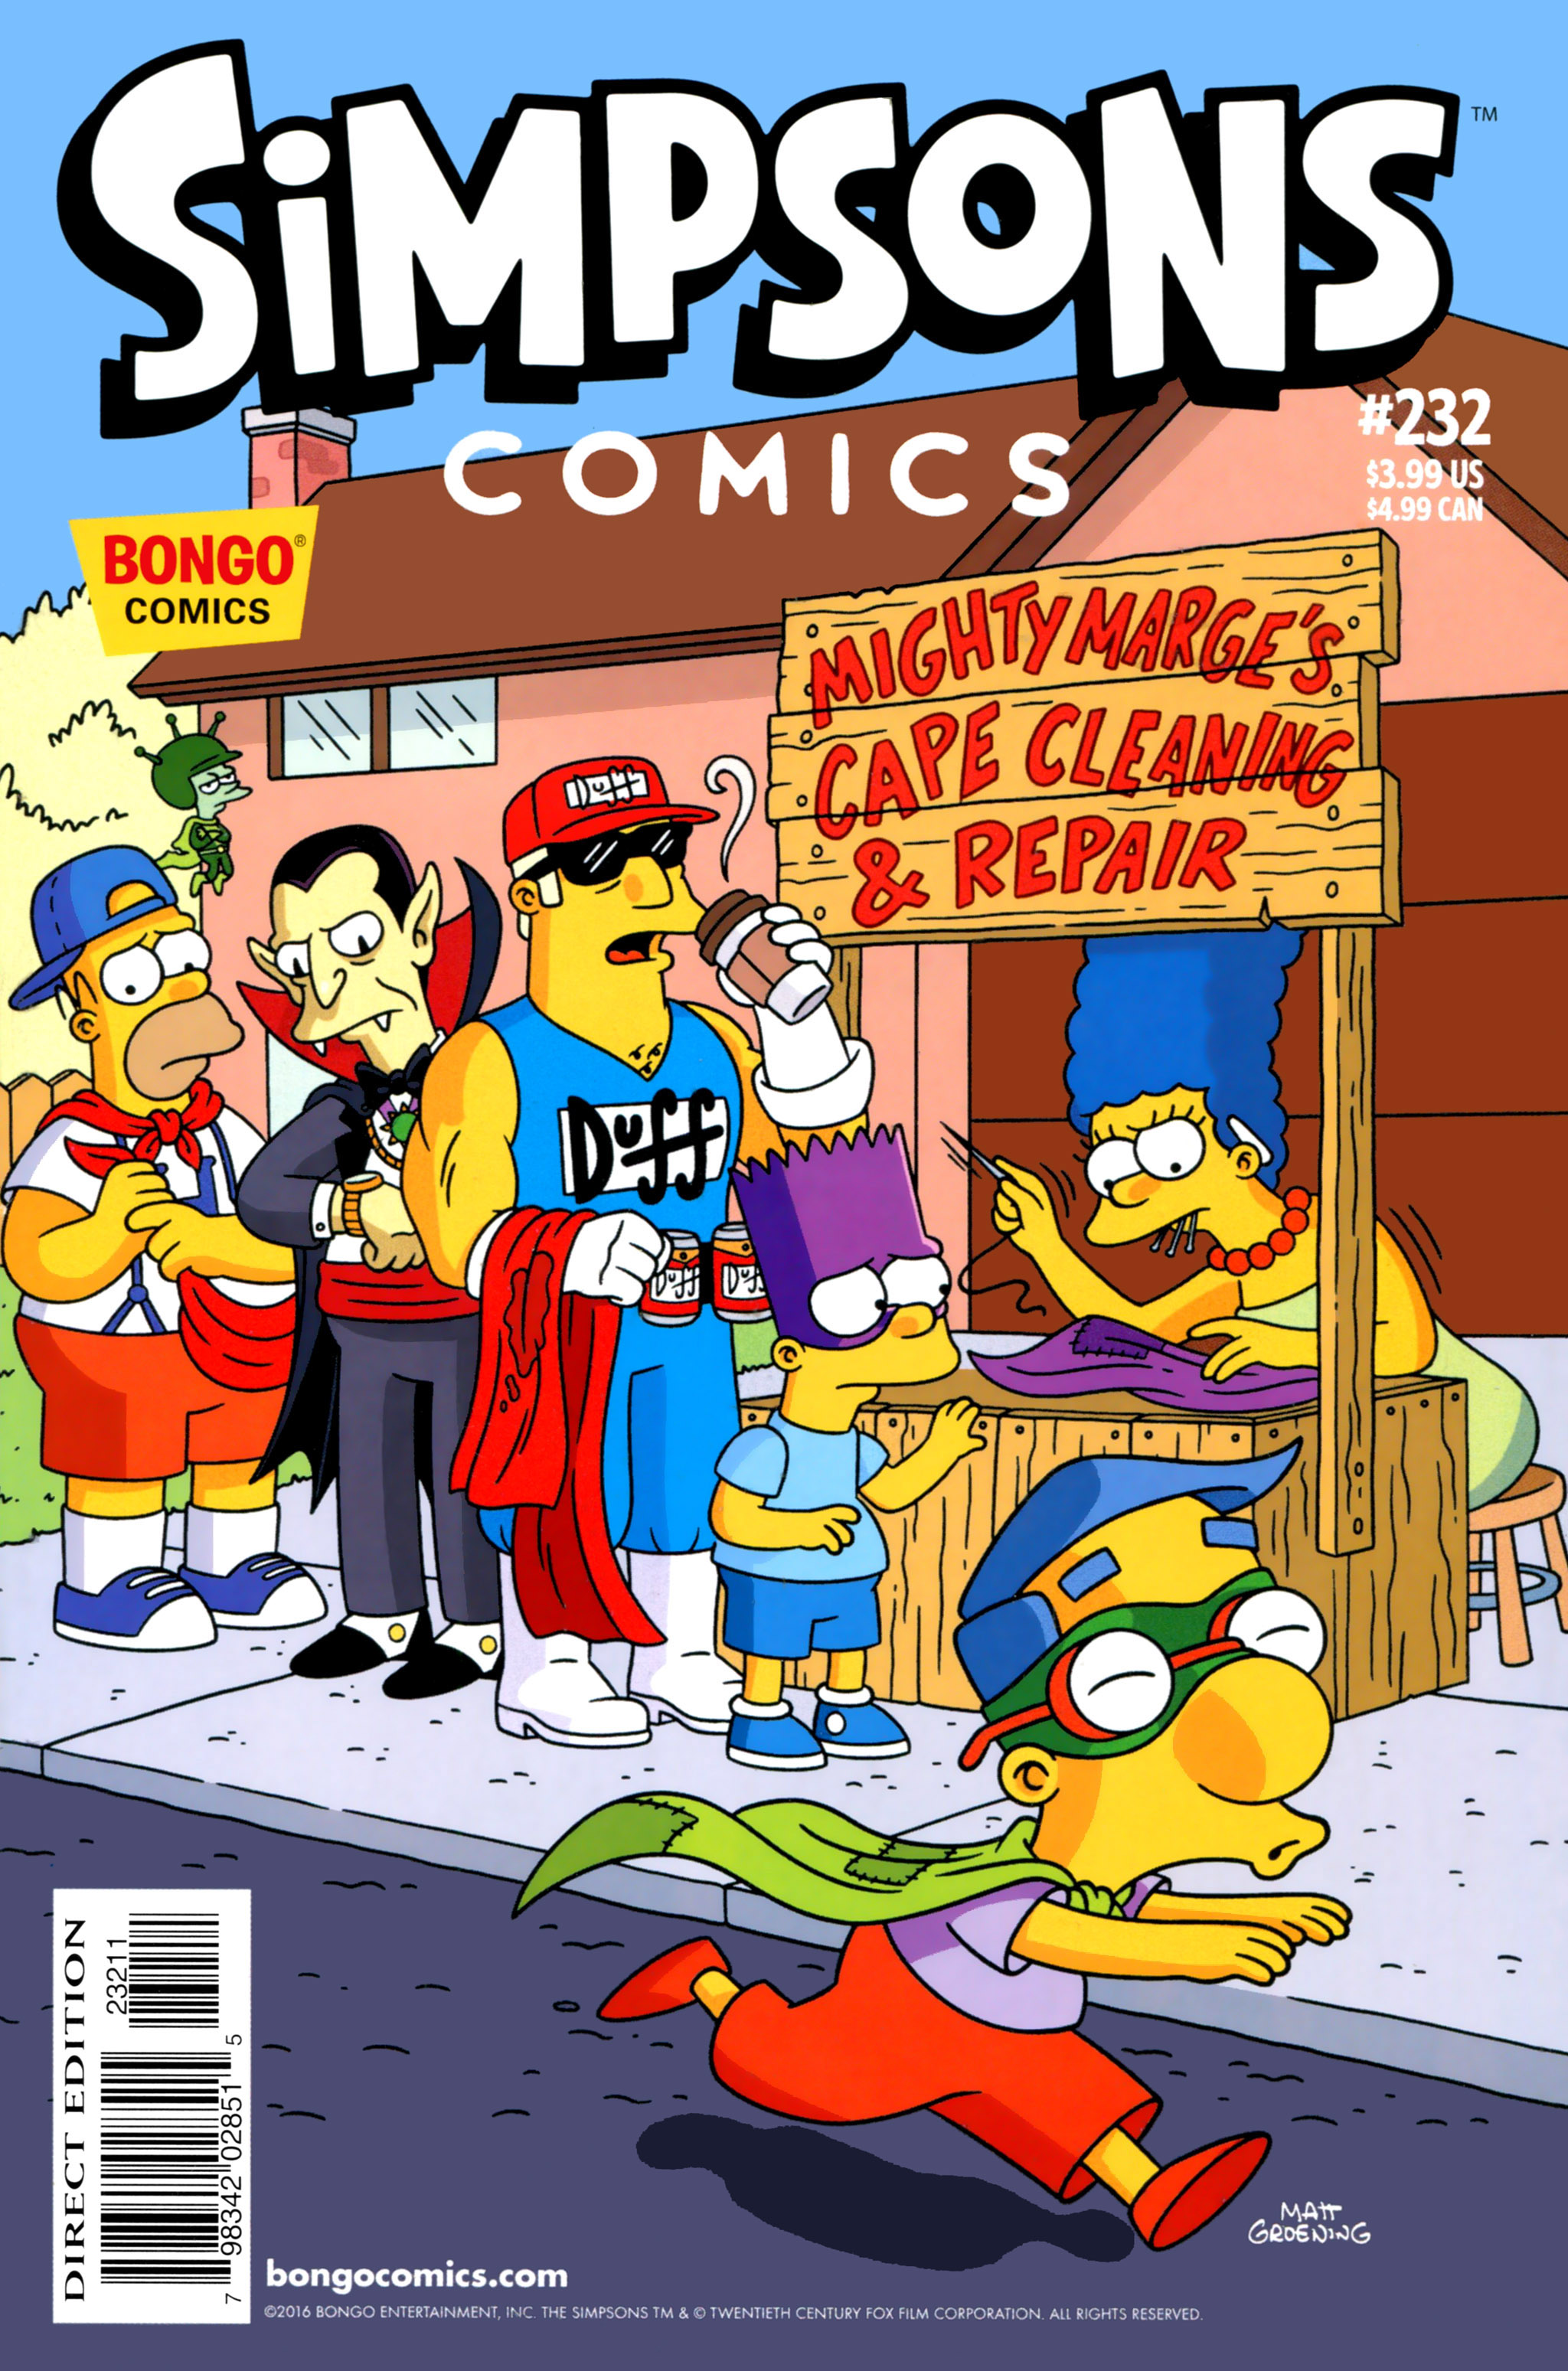 Simpsons Comics (1993-): Chapter 232 - Page 1